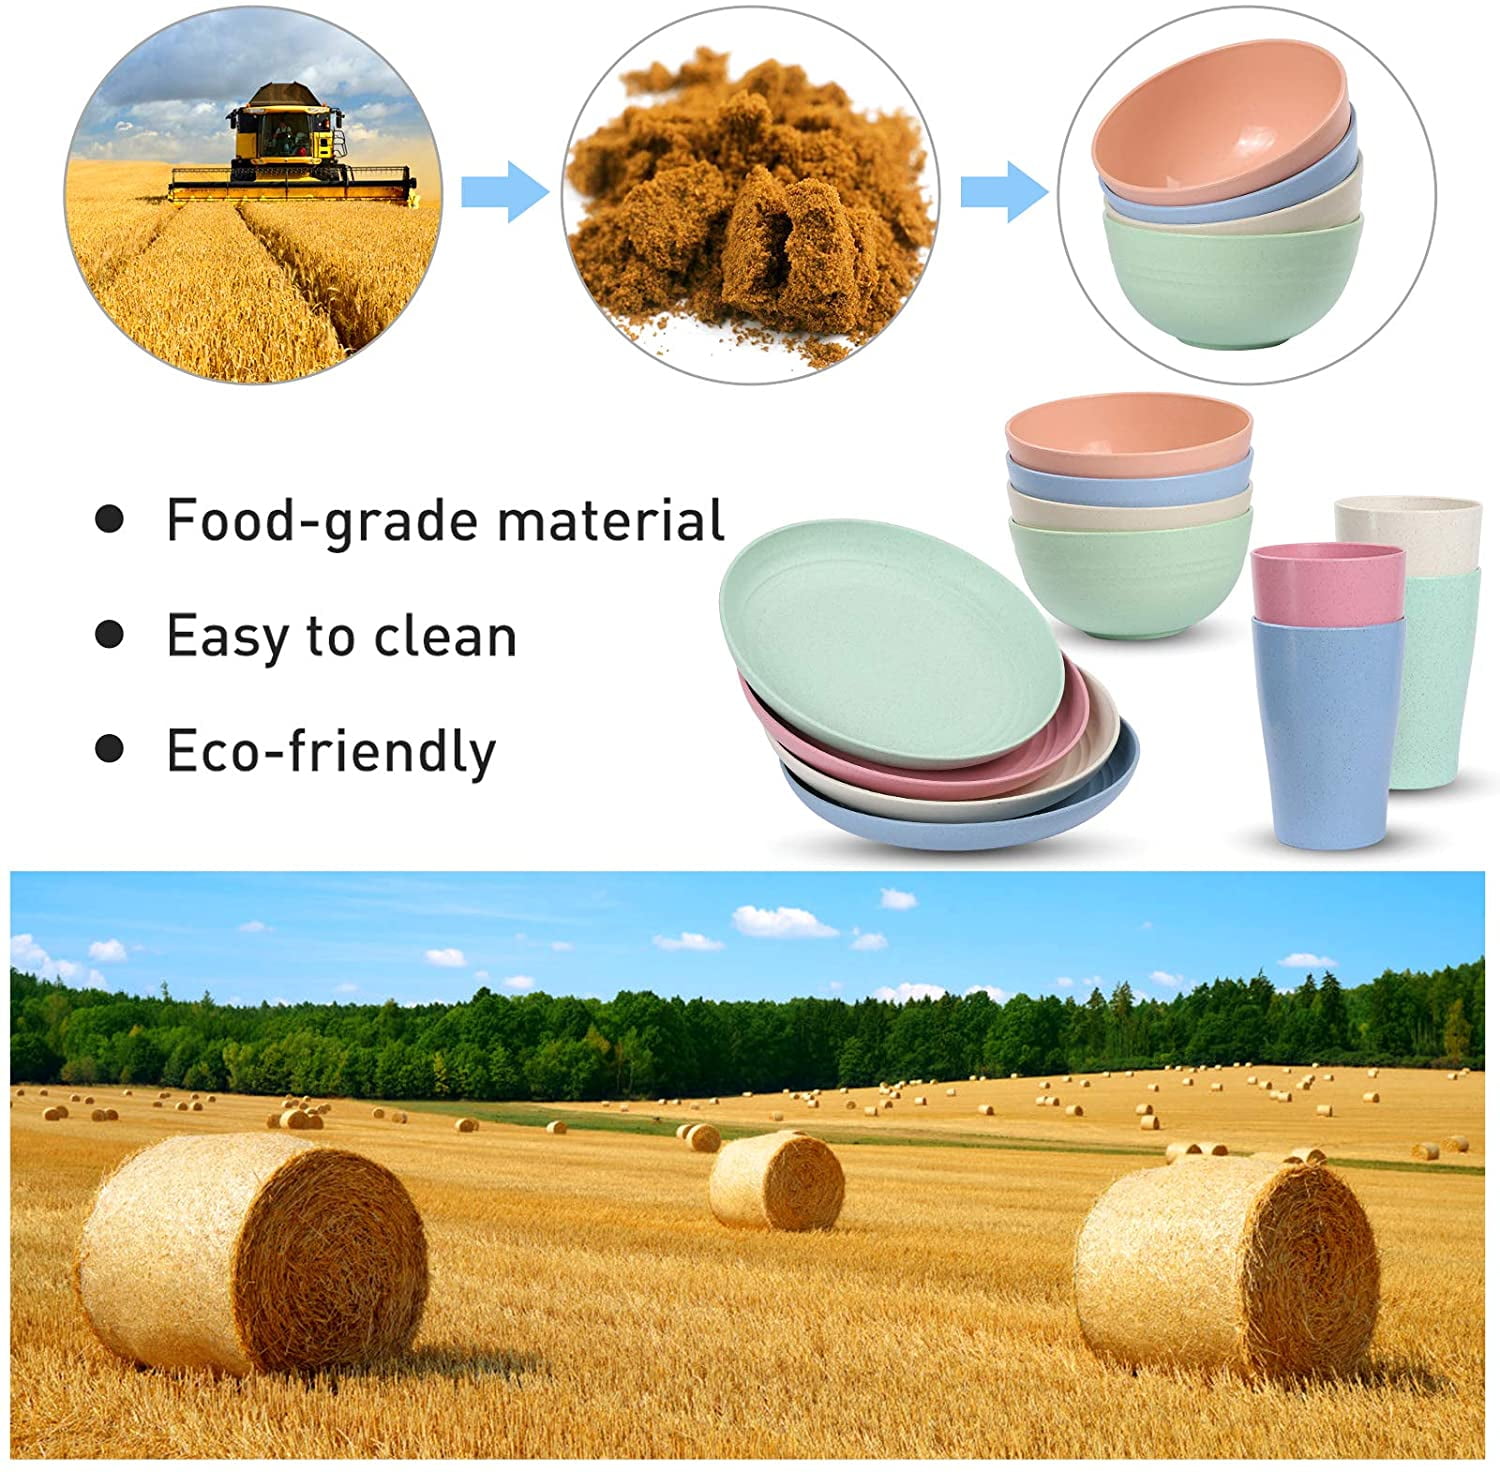 Lightweight & Unbreakable Wheat Straw Plates for child Feeding 7.3 4-Pack Wheat Straw Degradable Healthy BPA Free Plate for child,Microwave Dishwasher Safe Dinner Dishes 